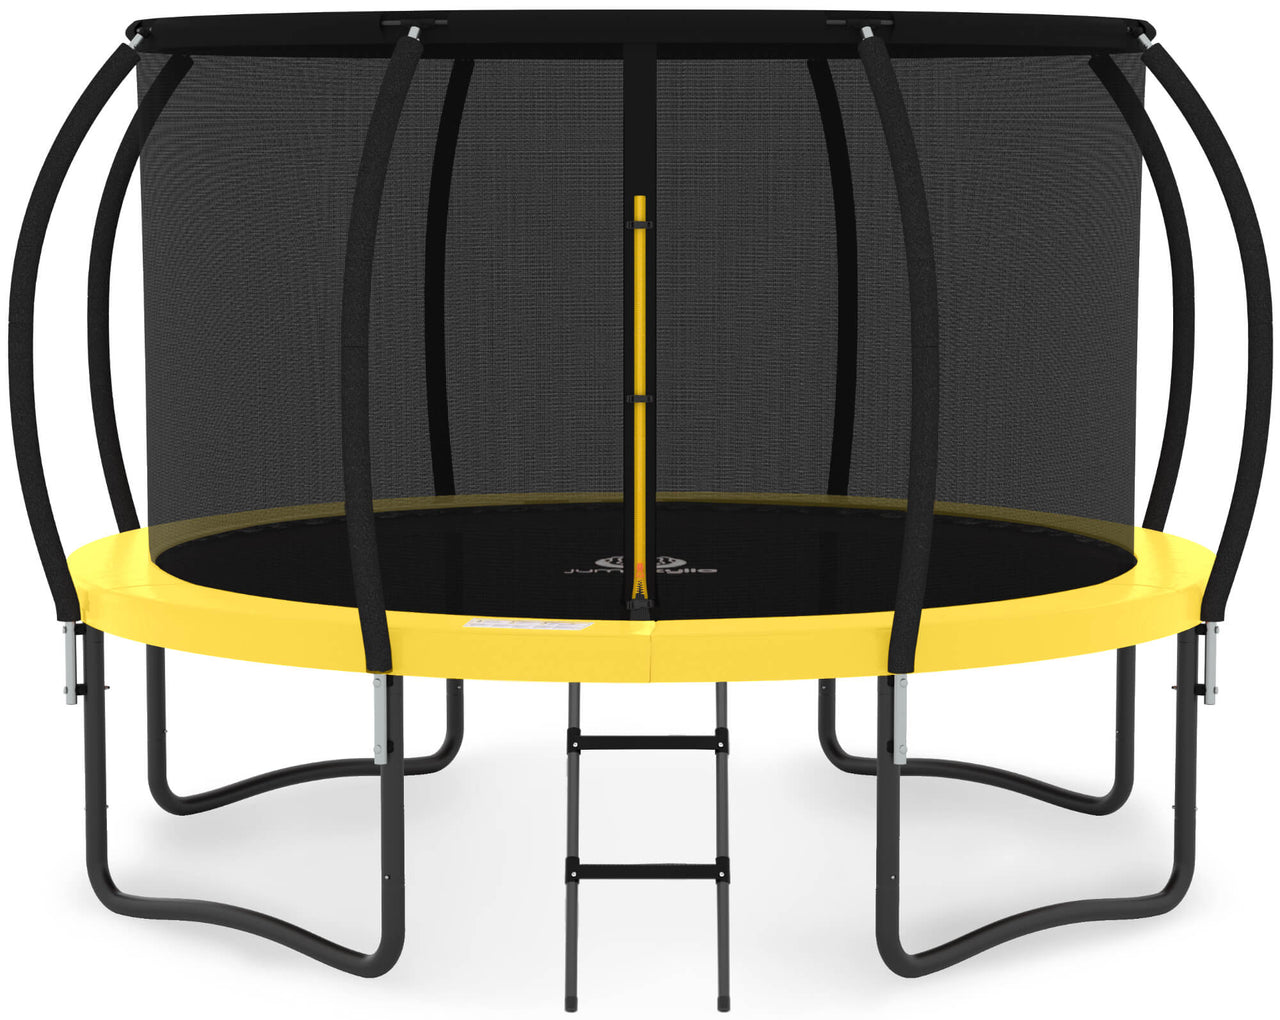 Jumpzylla 12FT Trampoline with Enclosure & Double Color Pad Cover